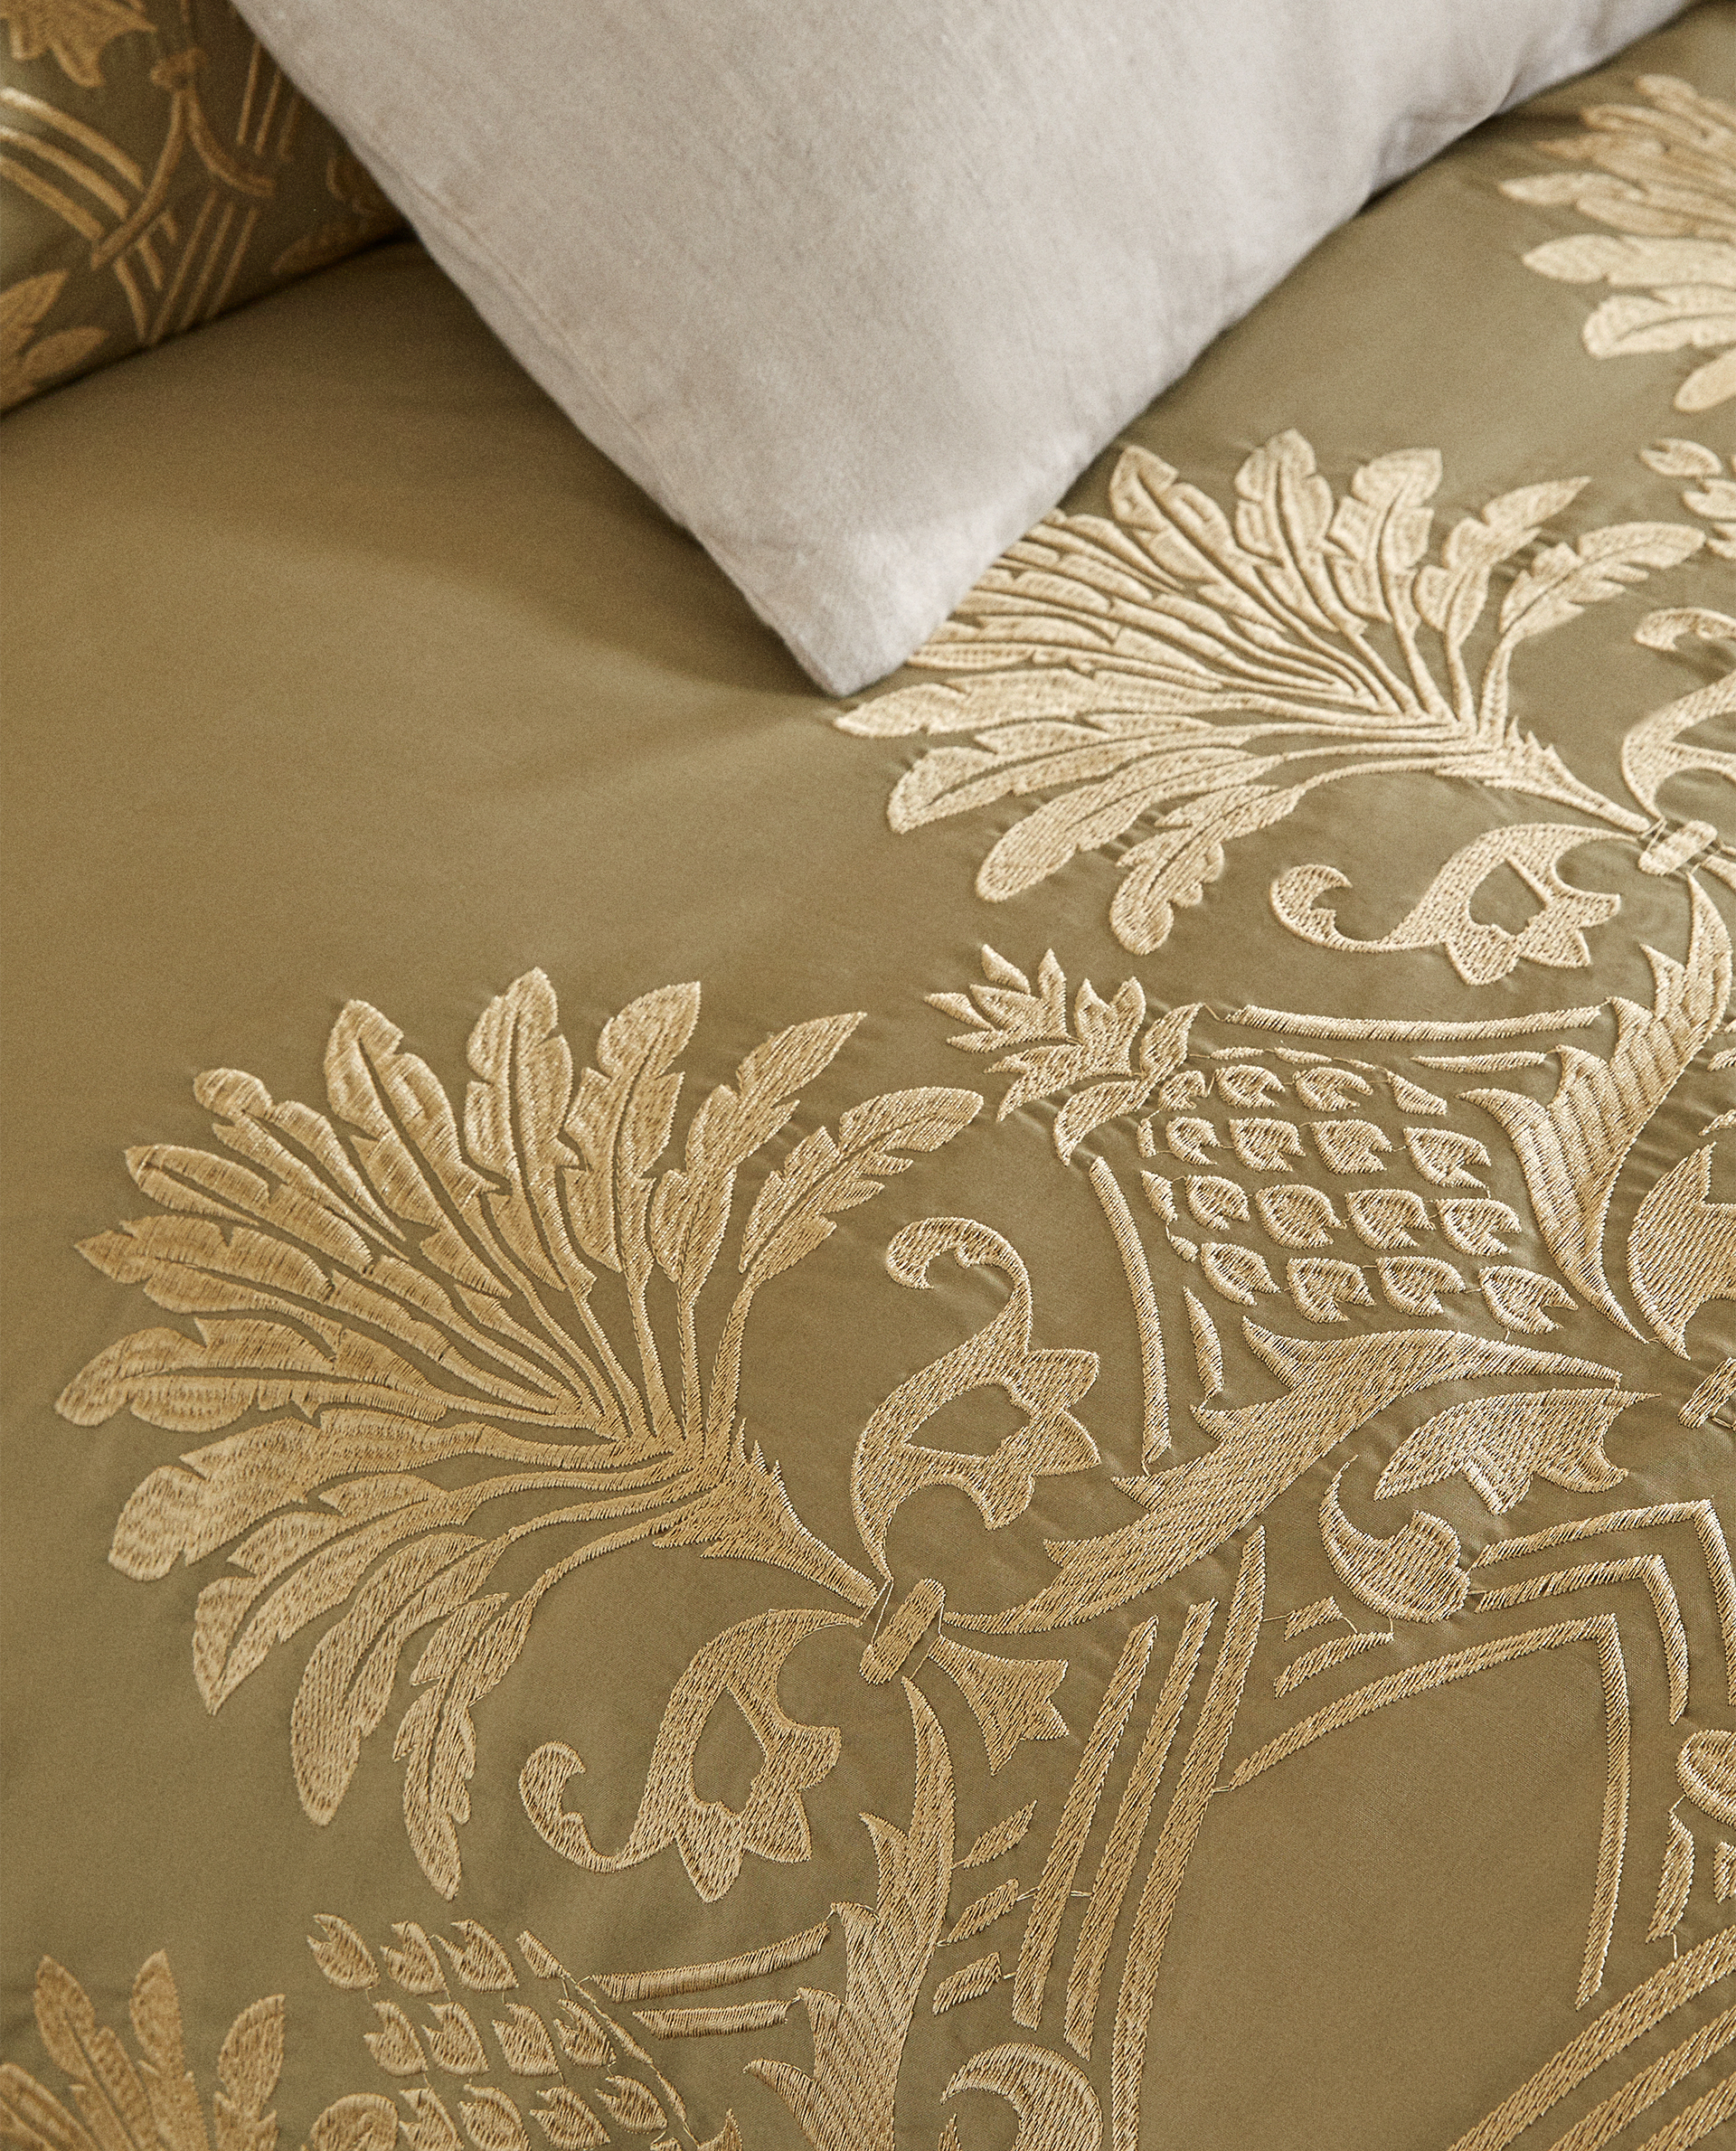 Embroidered Duvet Cover Covers, Brocade Duvet Covers